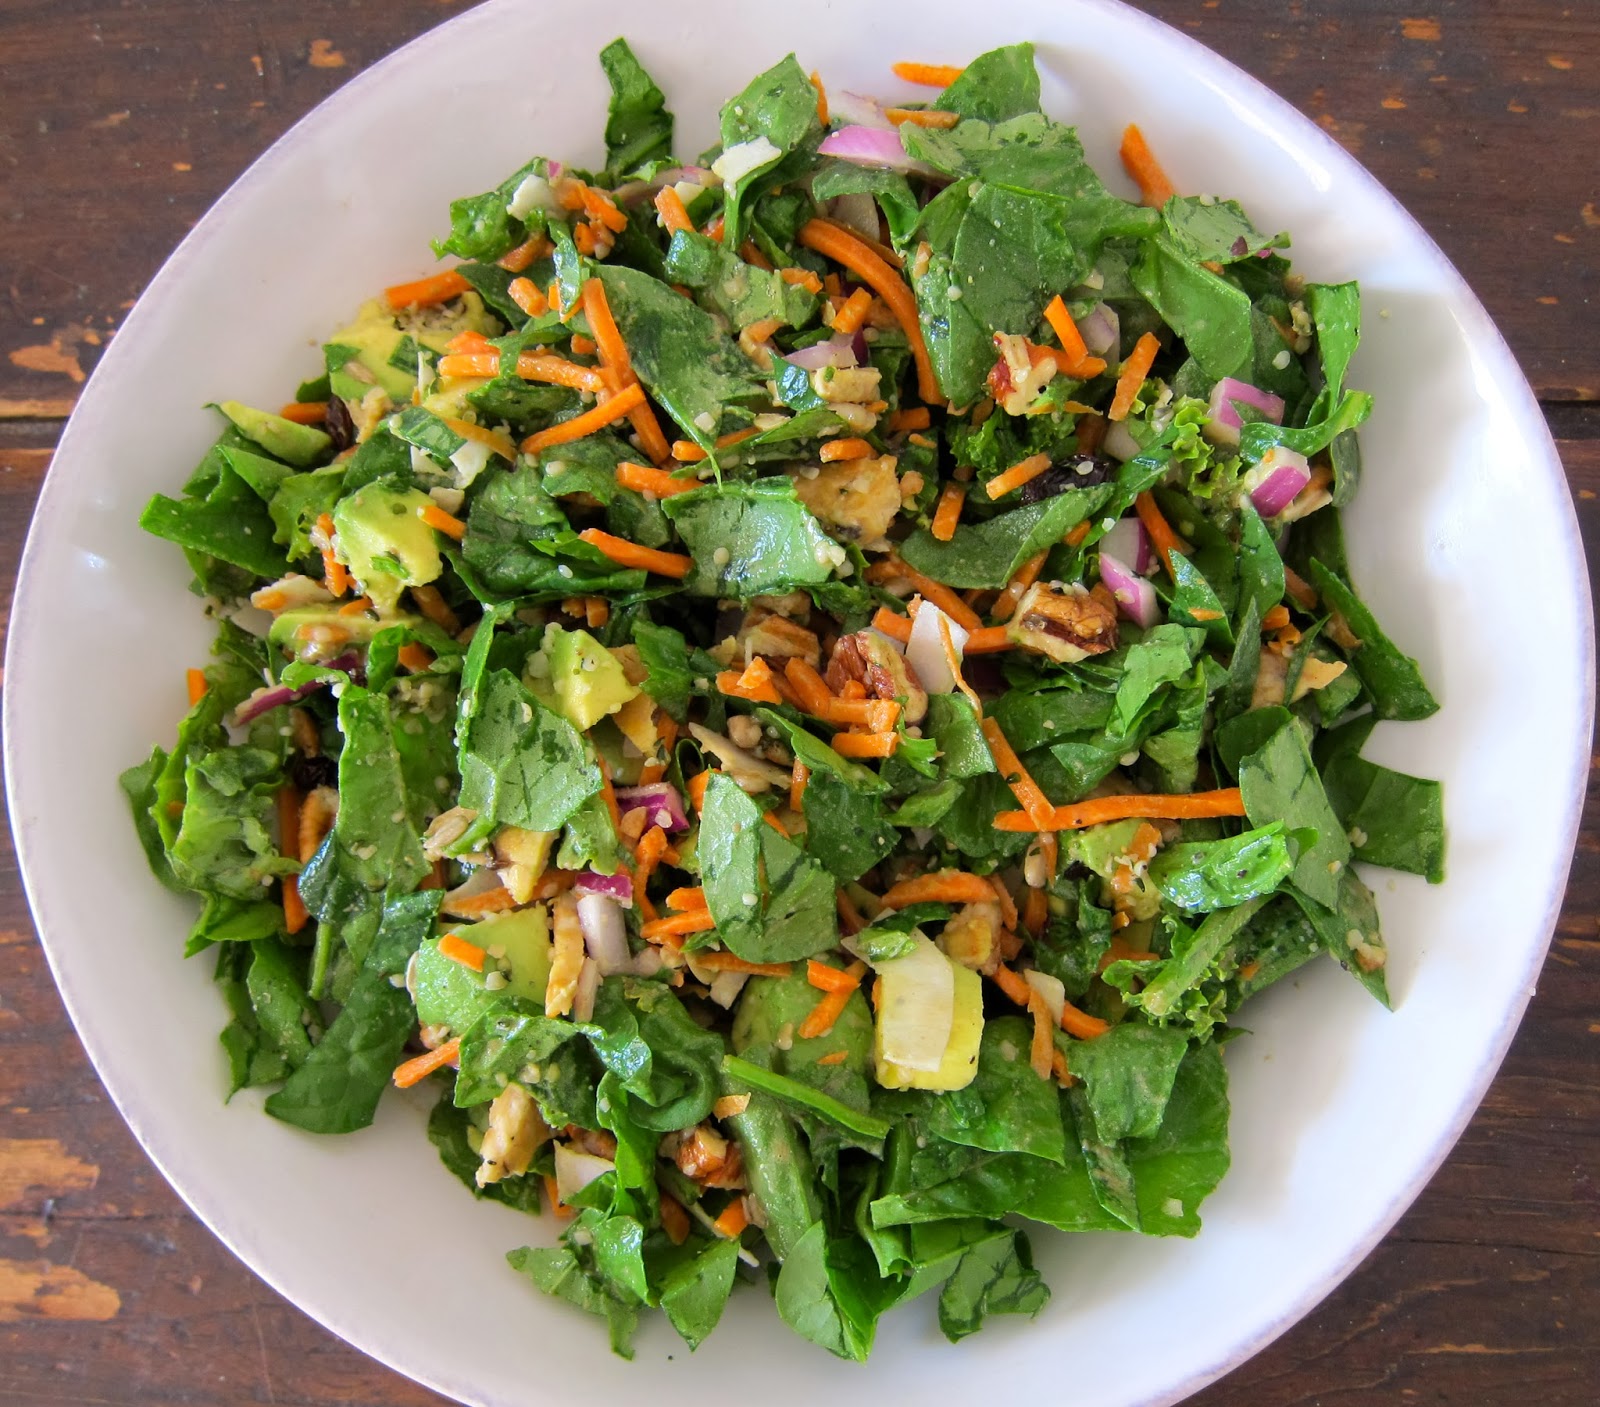 Albums 100+ Pictures Pictures Of Salads Images Completed